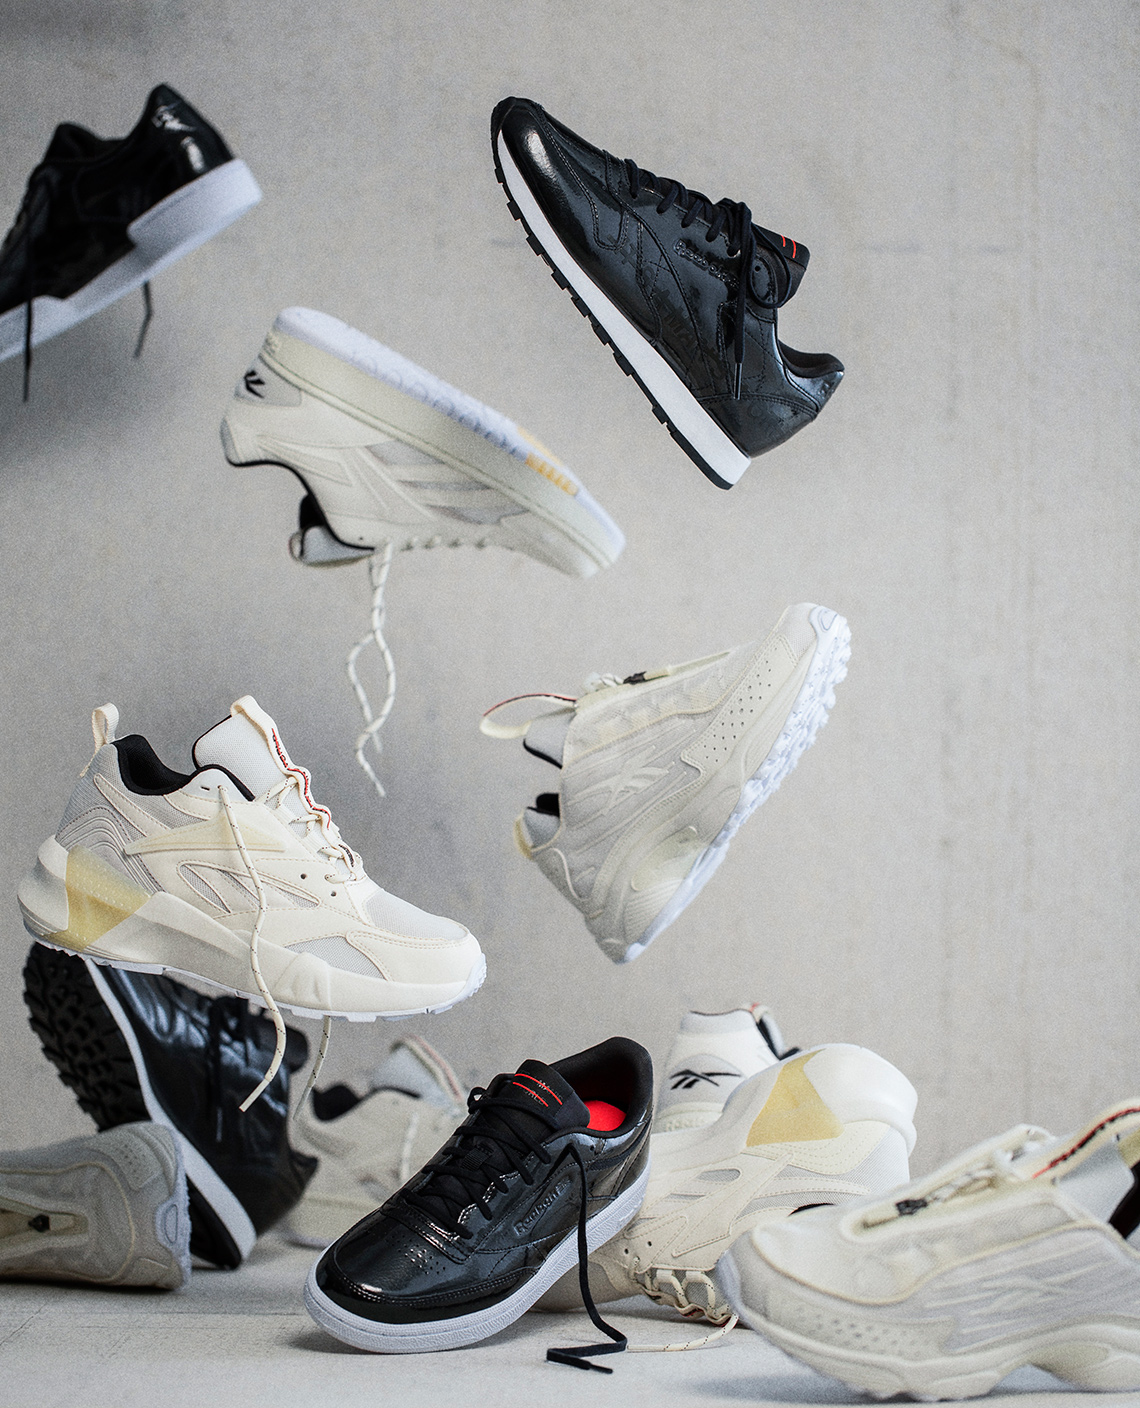 Reebok Ss20 Its A Mans World Campaign Release Info 2